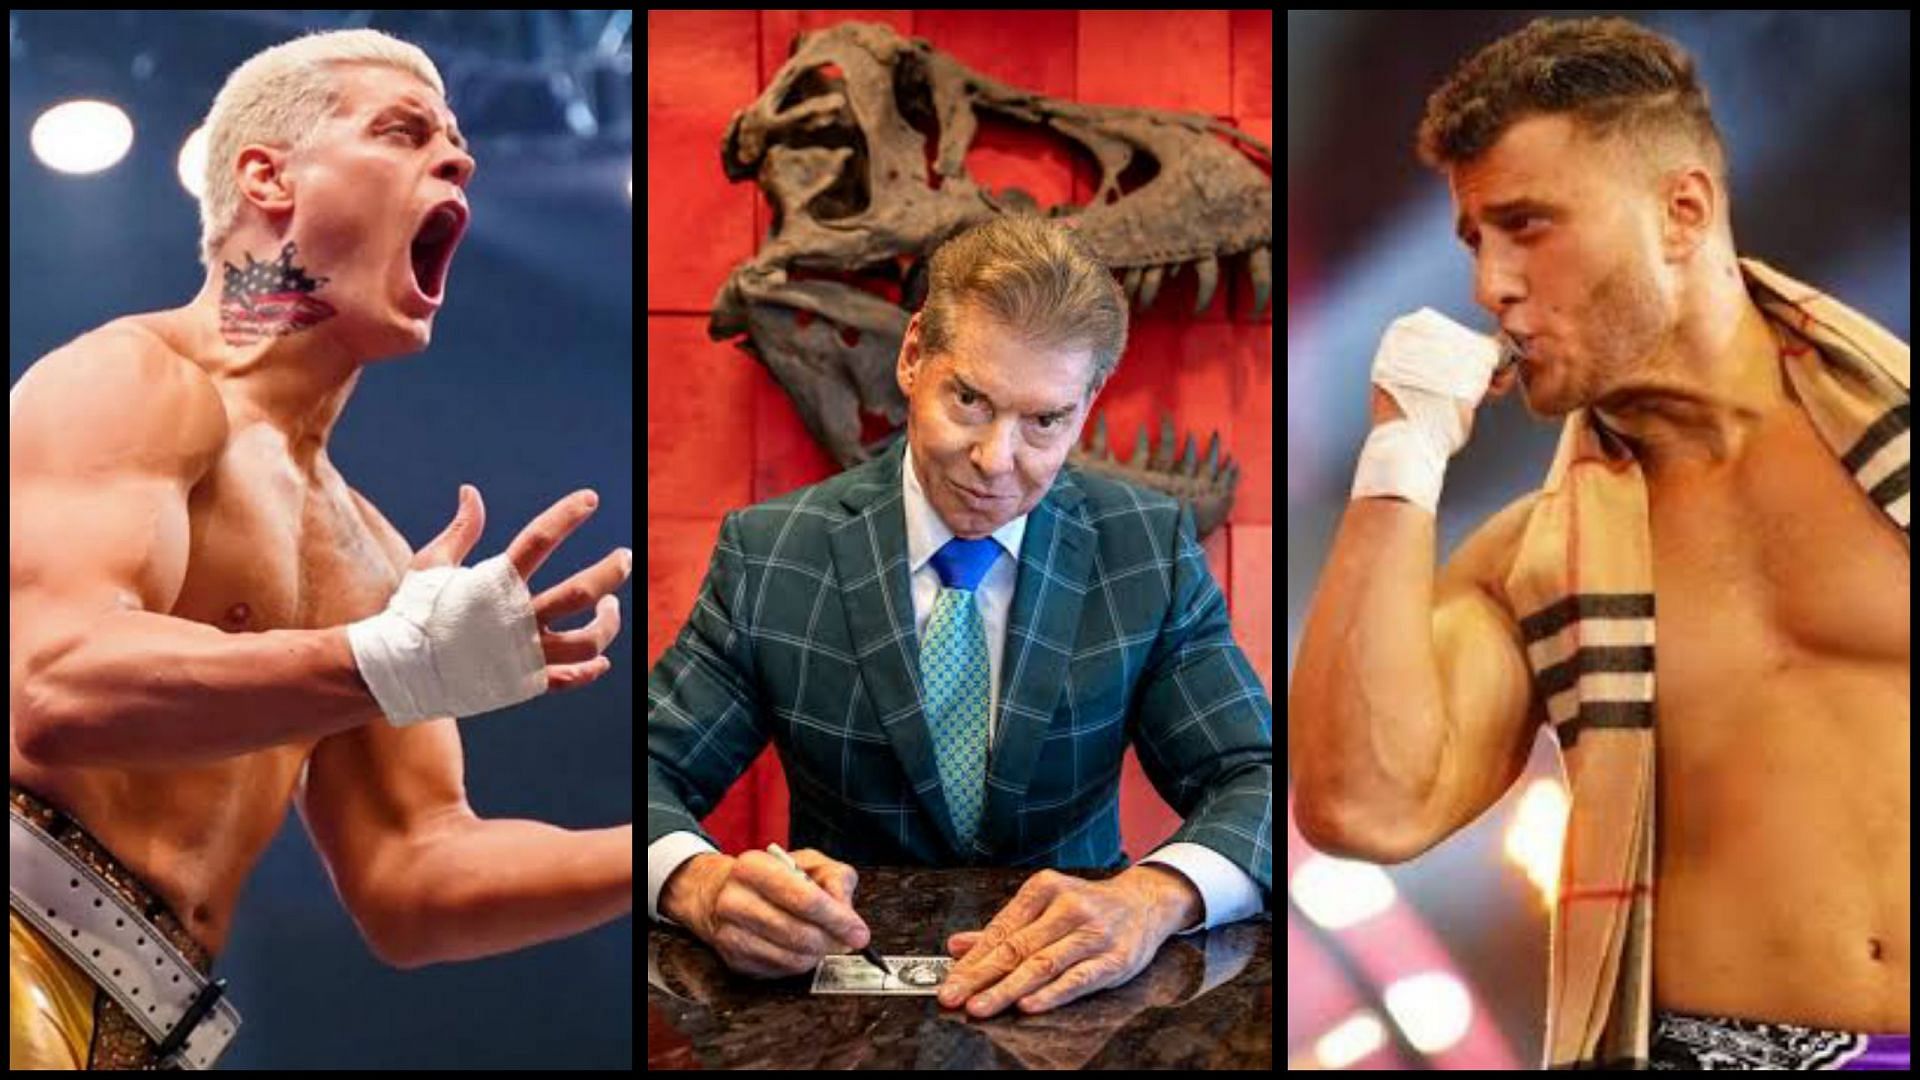 Will Vince McMahon sign more AEW guys after Cody Rhodes?